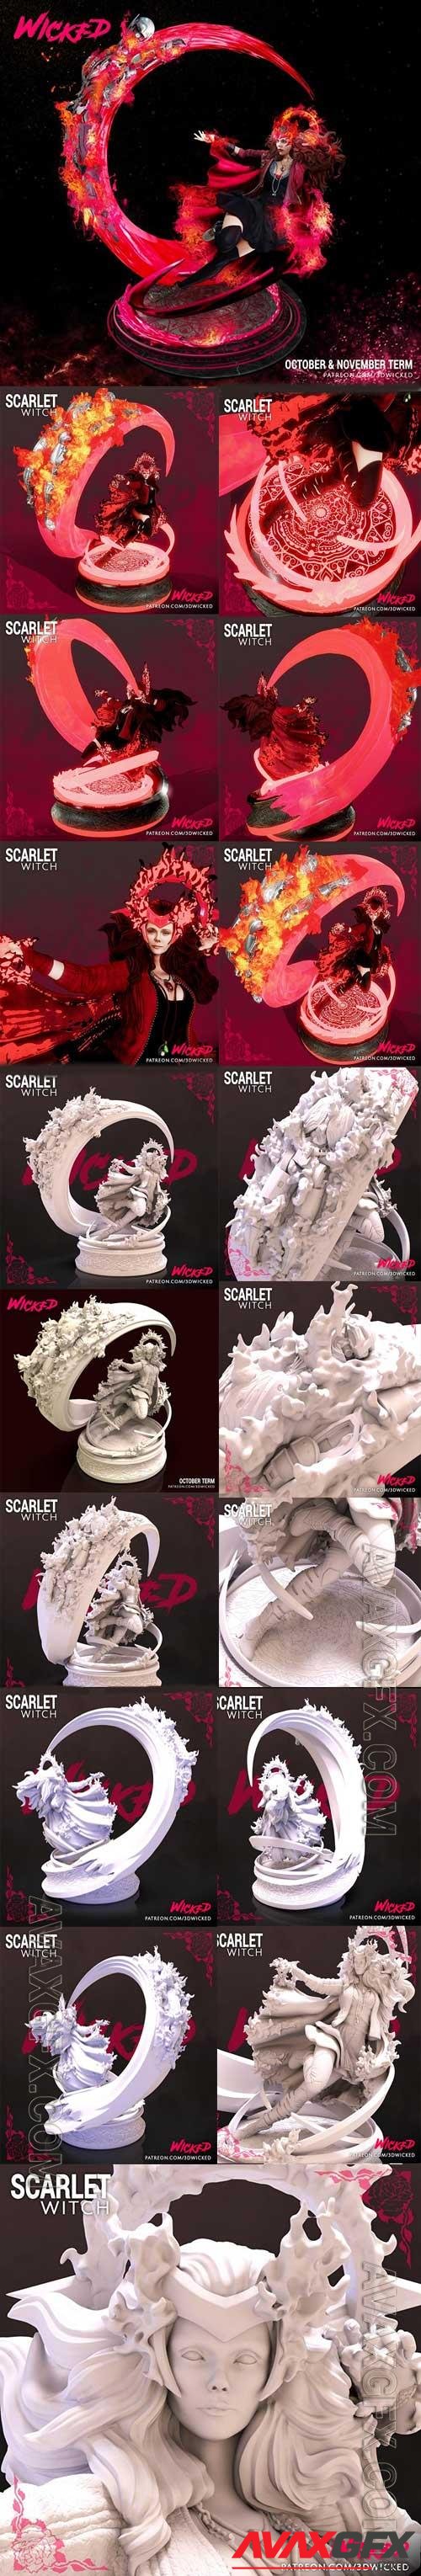 3D Print Models Wicked - Scarlet Witch Sculpture